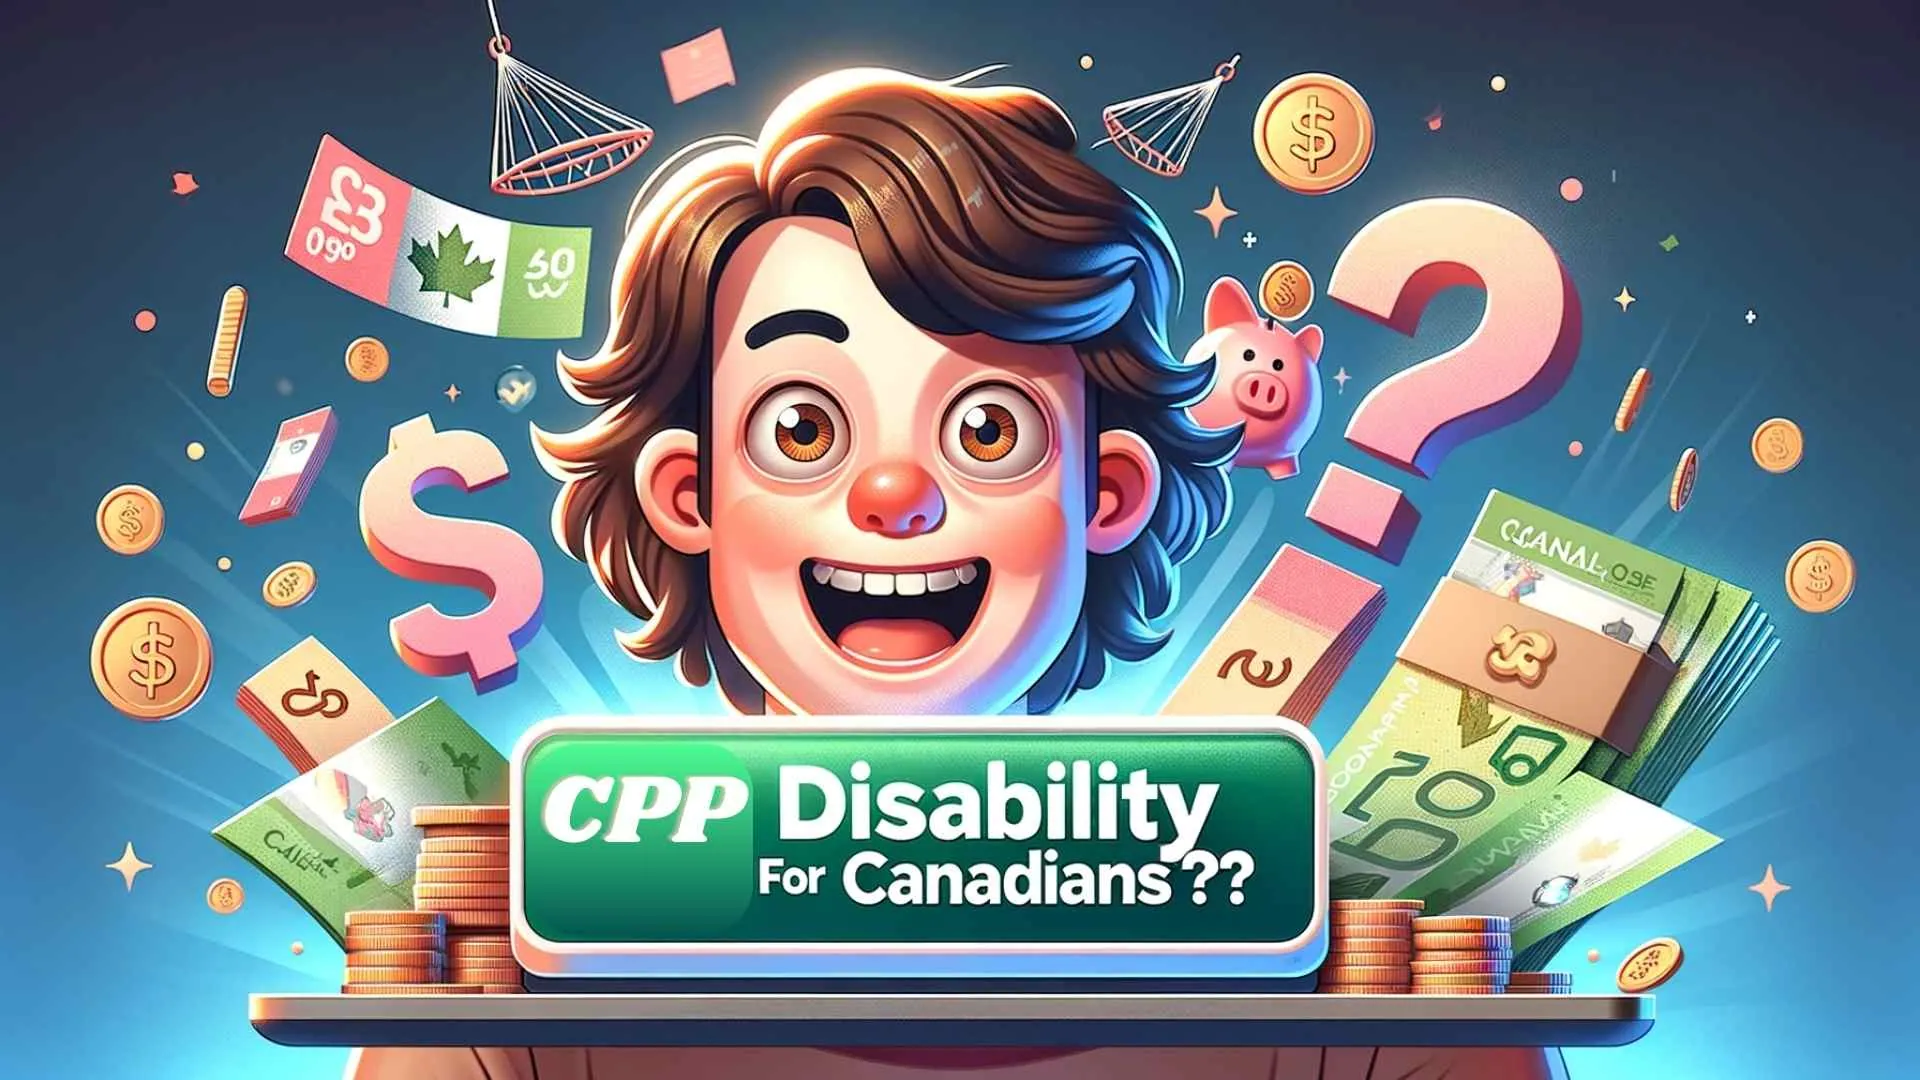 CPP Disability for Canadians